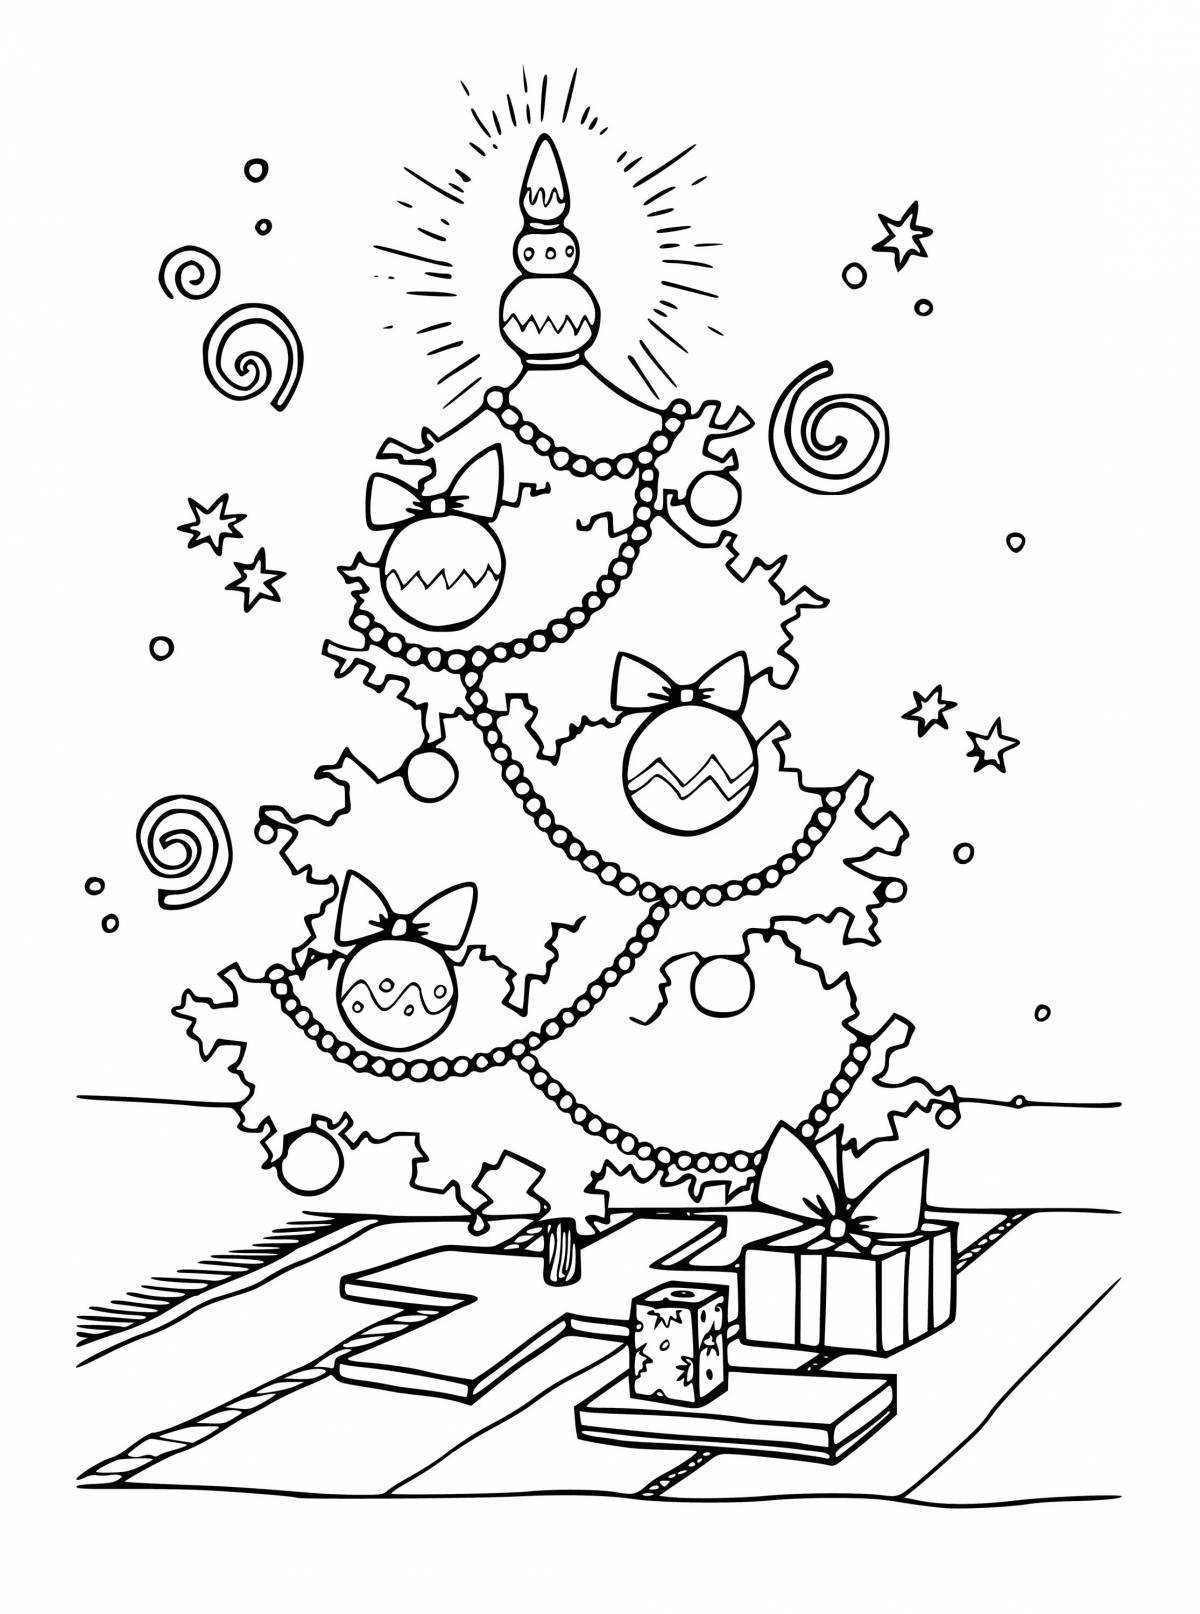 Colorful Christmas tree coloring book for kids